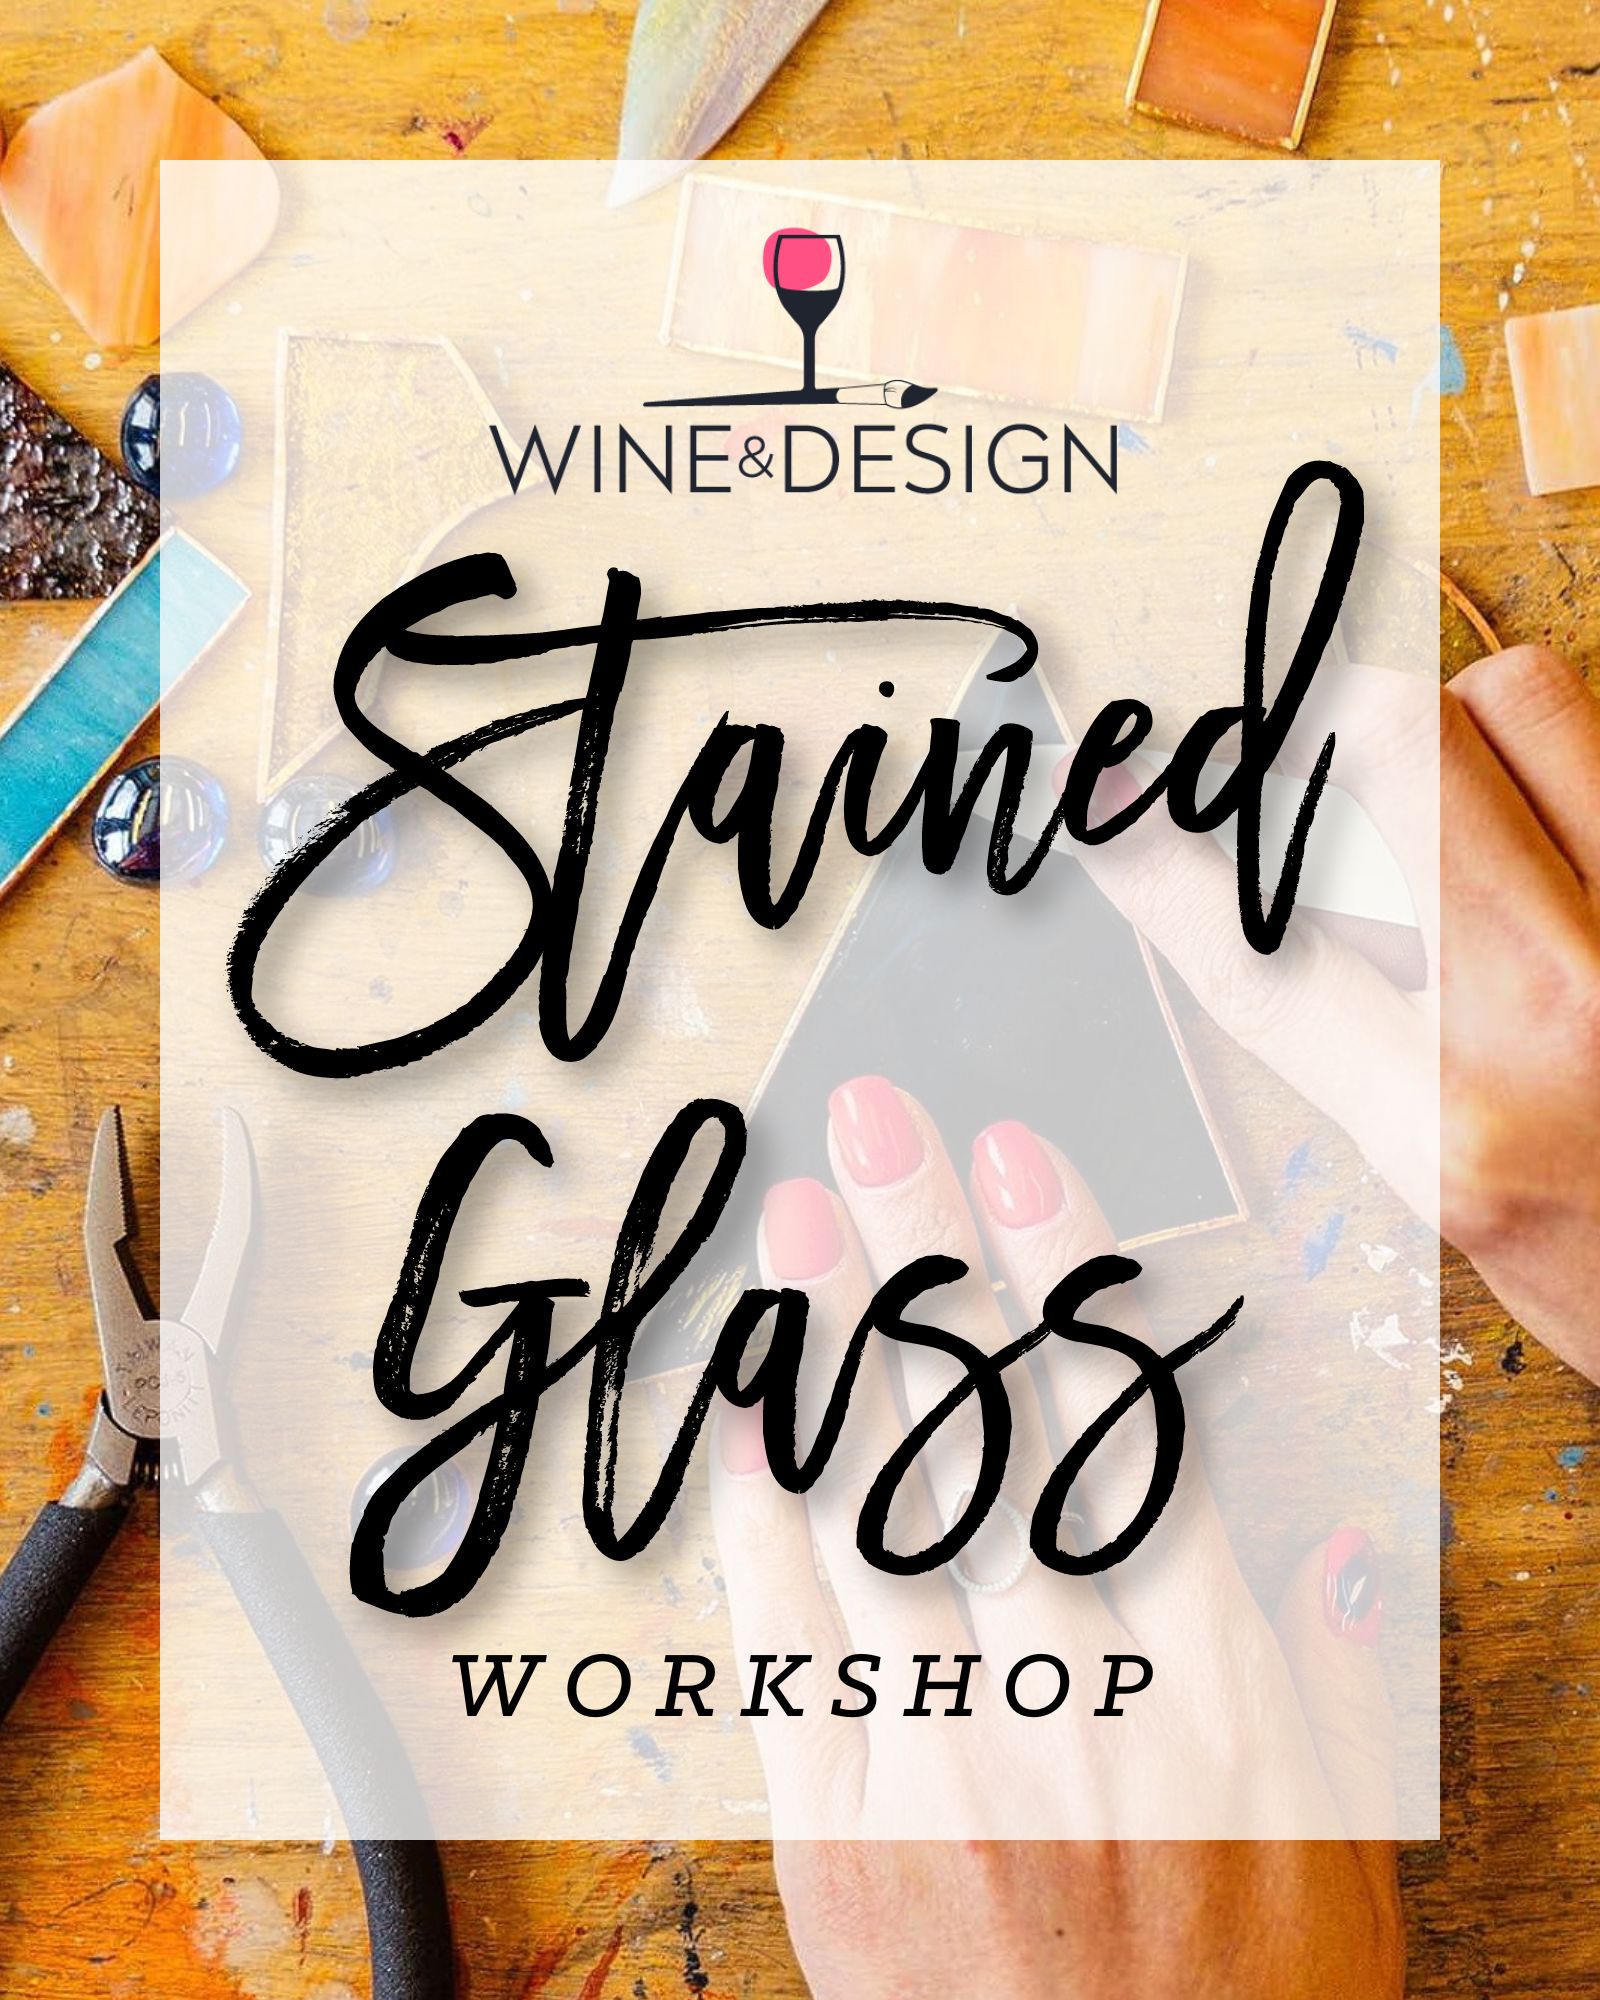 8 spots Left! Stained Glass Workshop!